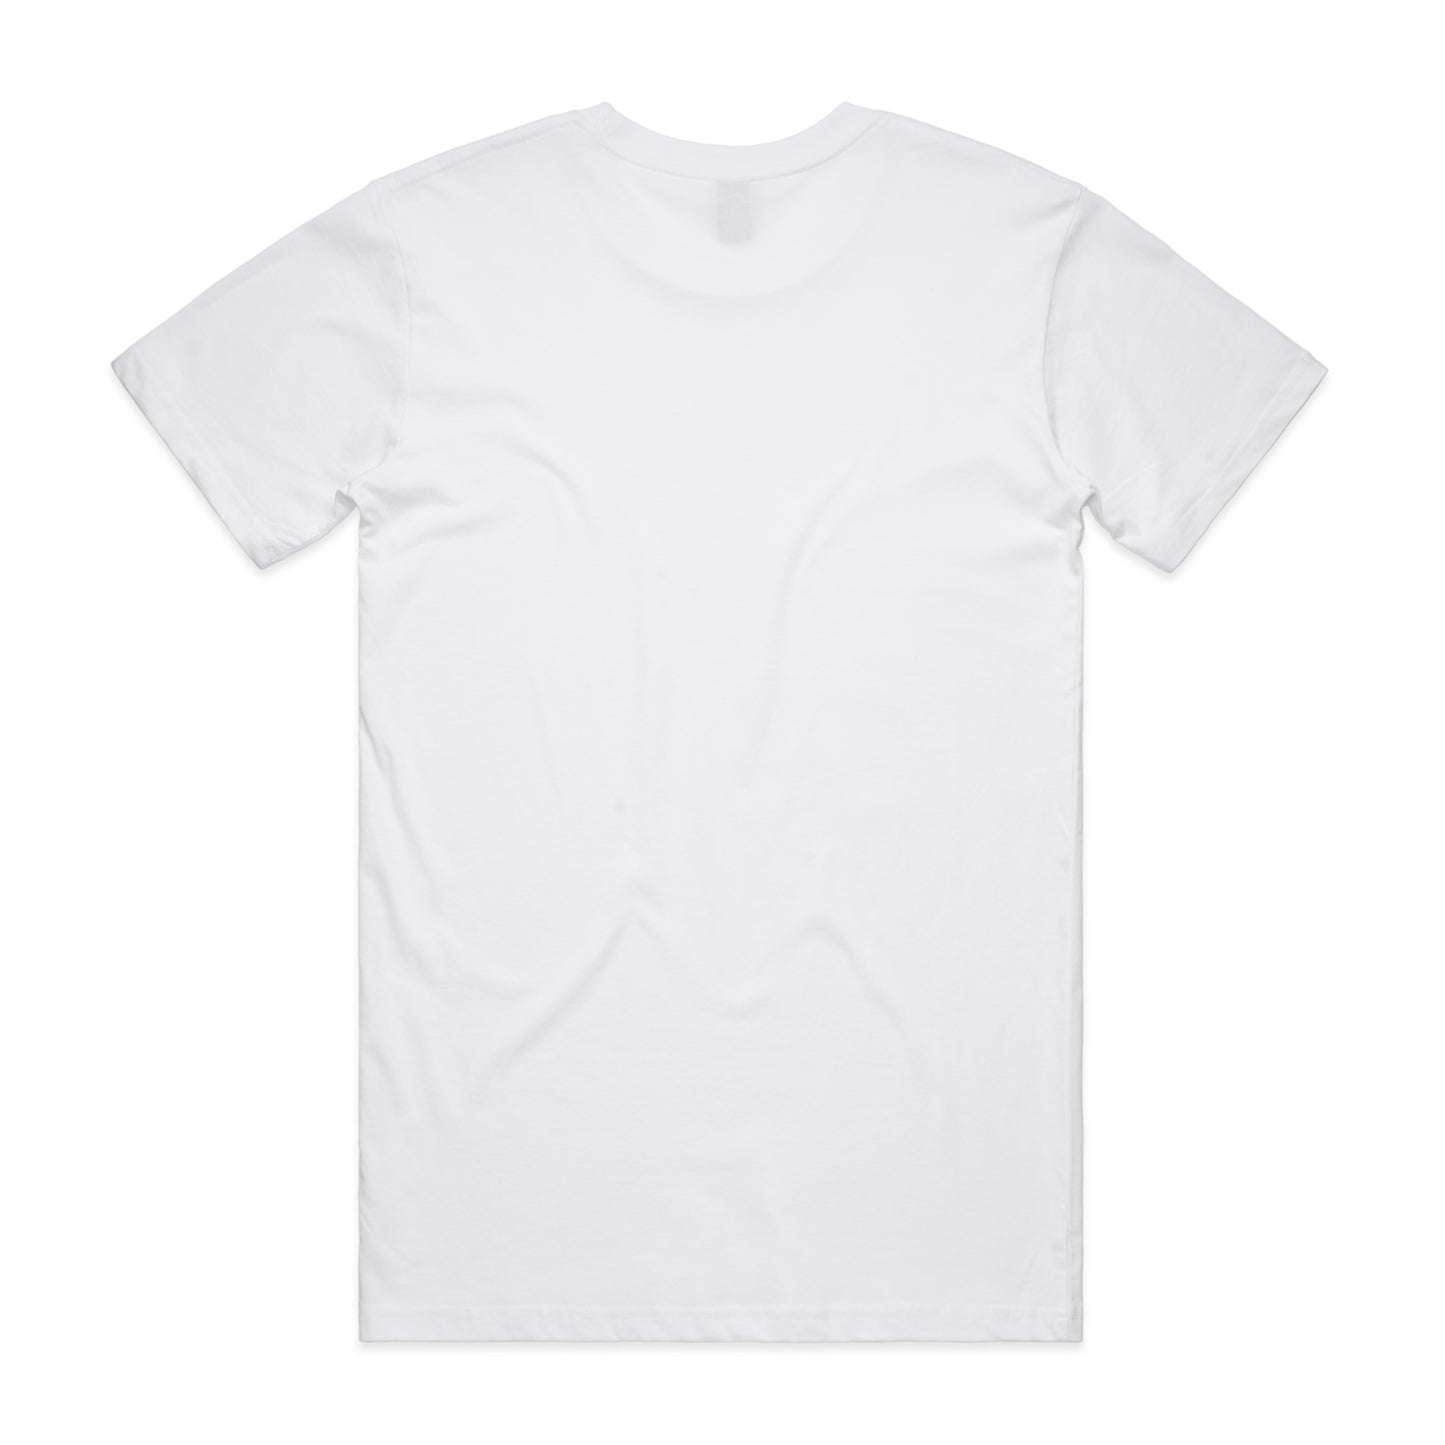 Forever TSPOON - recycled fabric tee - white -  black print